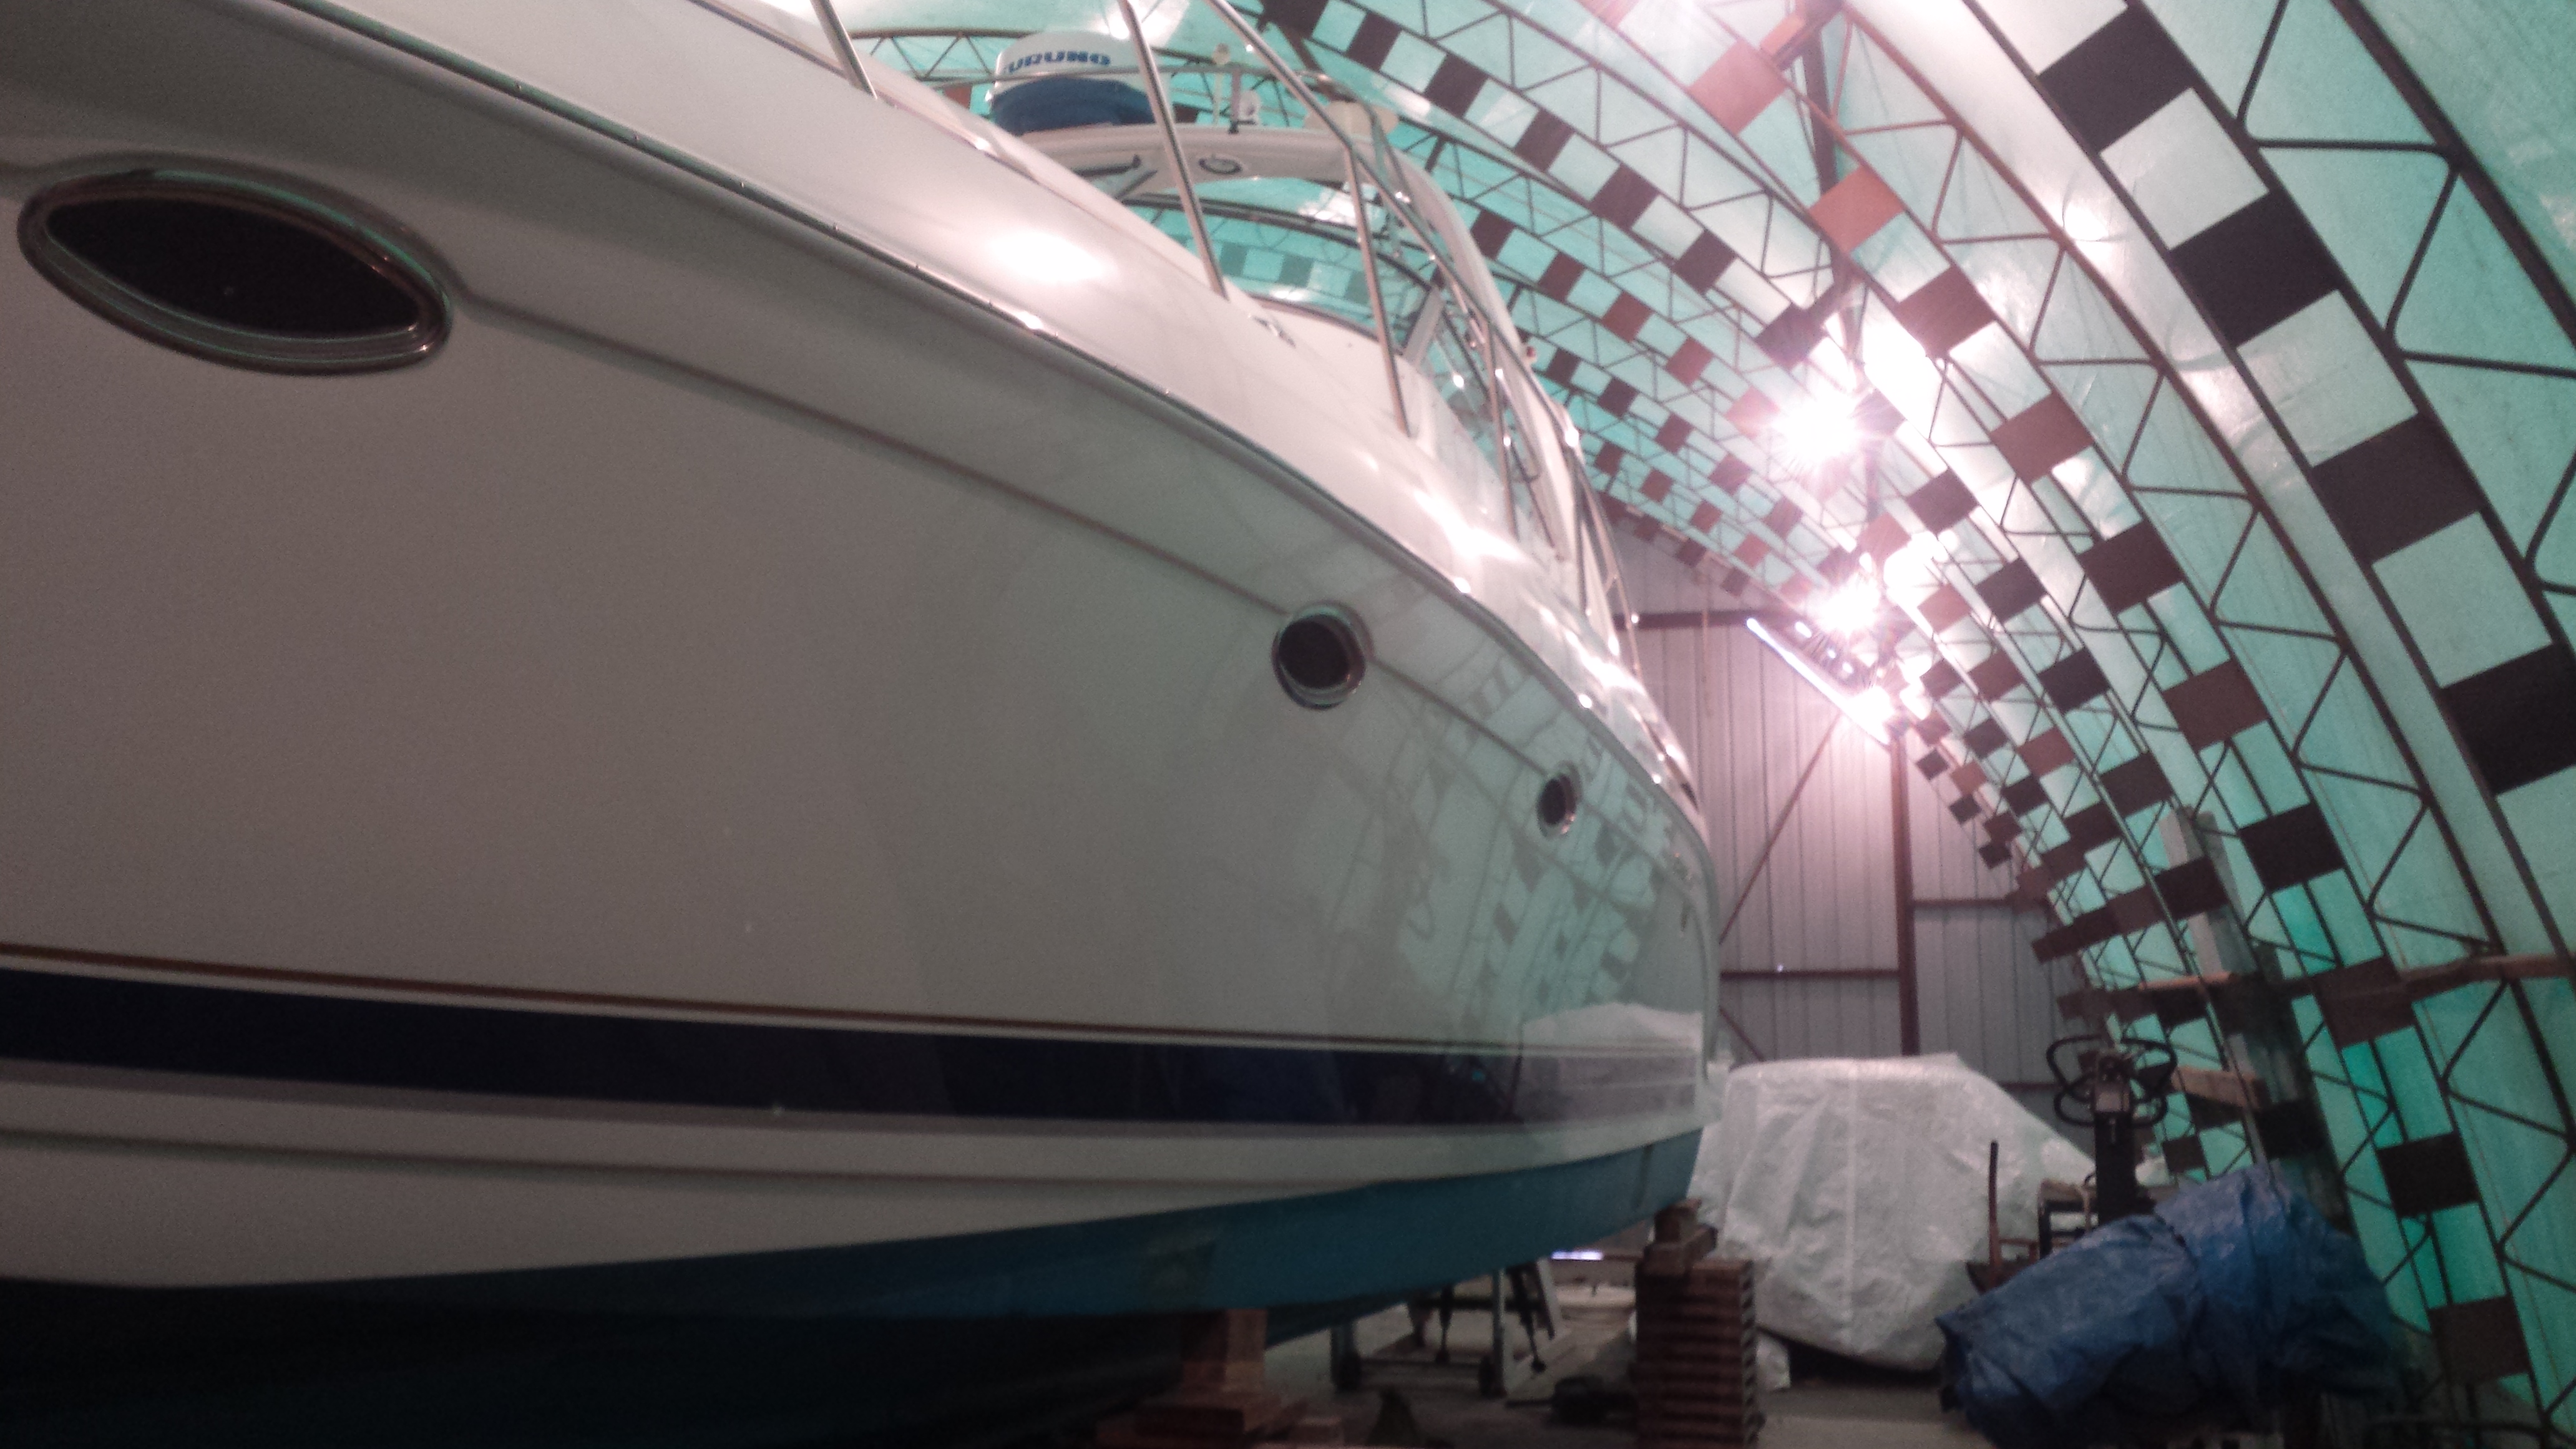 Formula boat maintenance and repairs from MRV Marine Services.